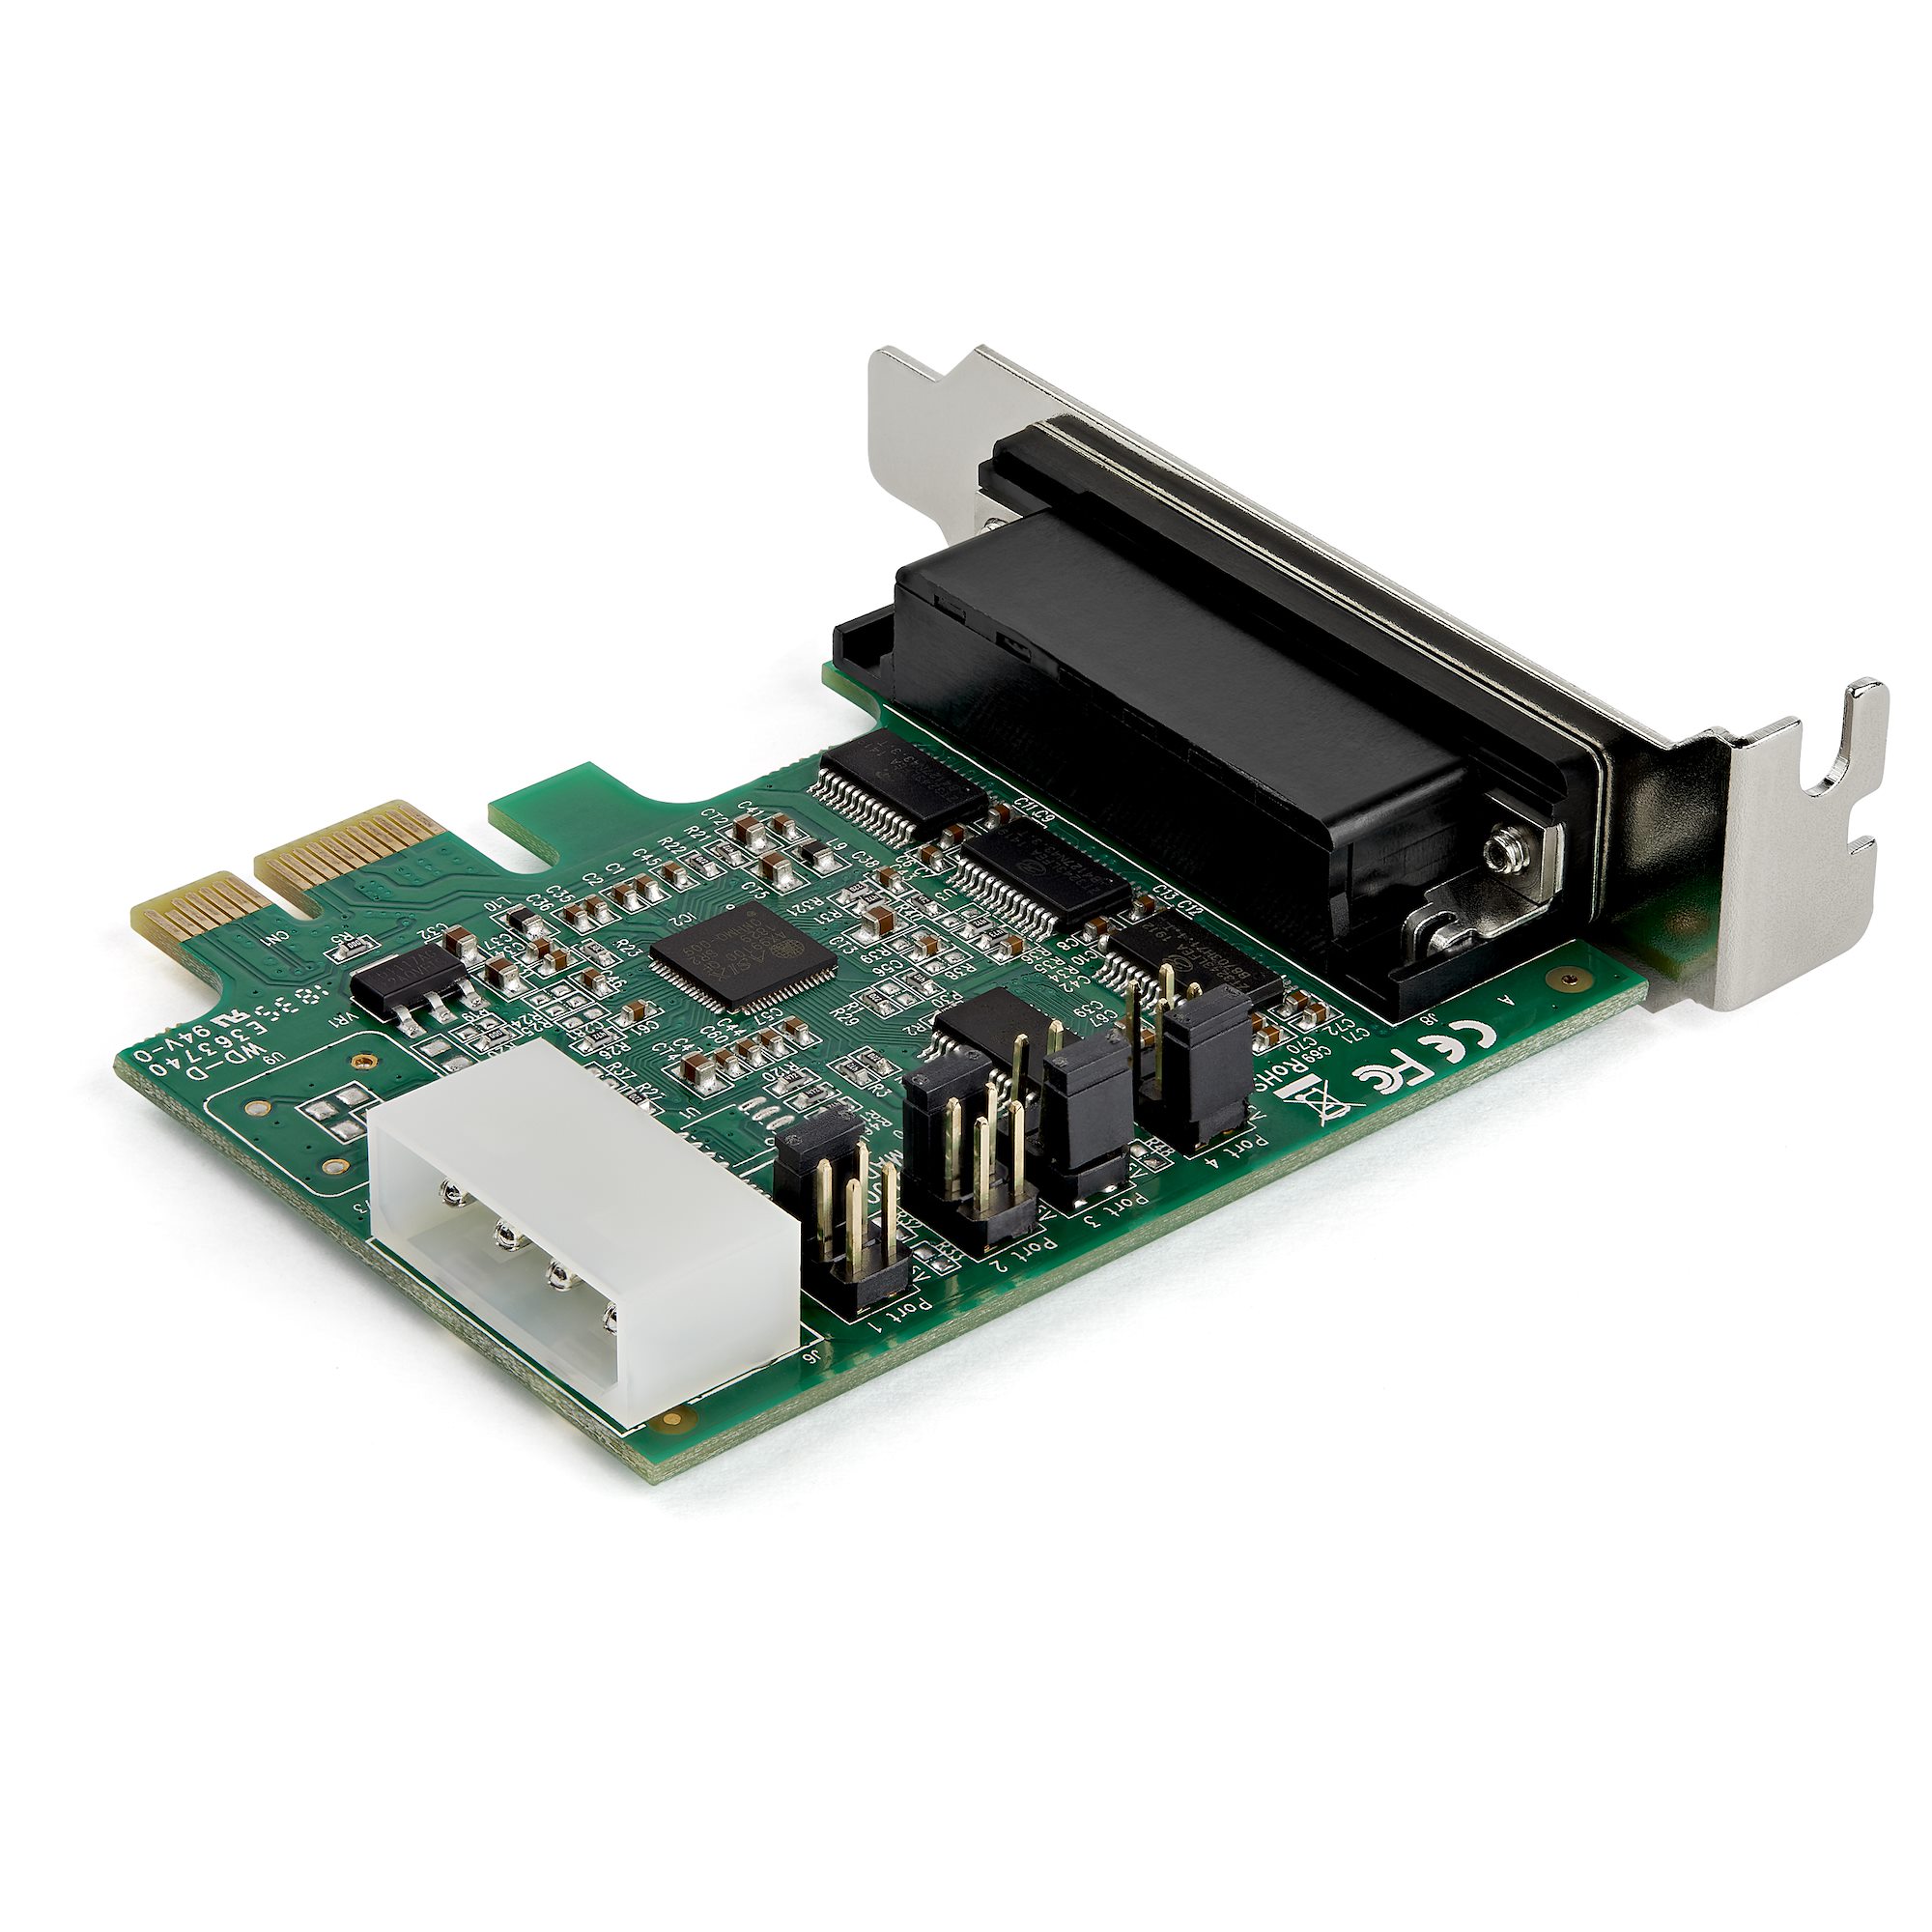 Ableconn PEX4S-954 4 Port RS232 PCI Express Serial Adapter Card with Power Output and 16950 UART Optional 5V Power Output on Pin9 of DB9 OXPCIe954 Chipset 